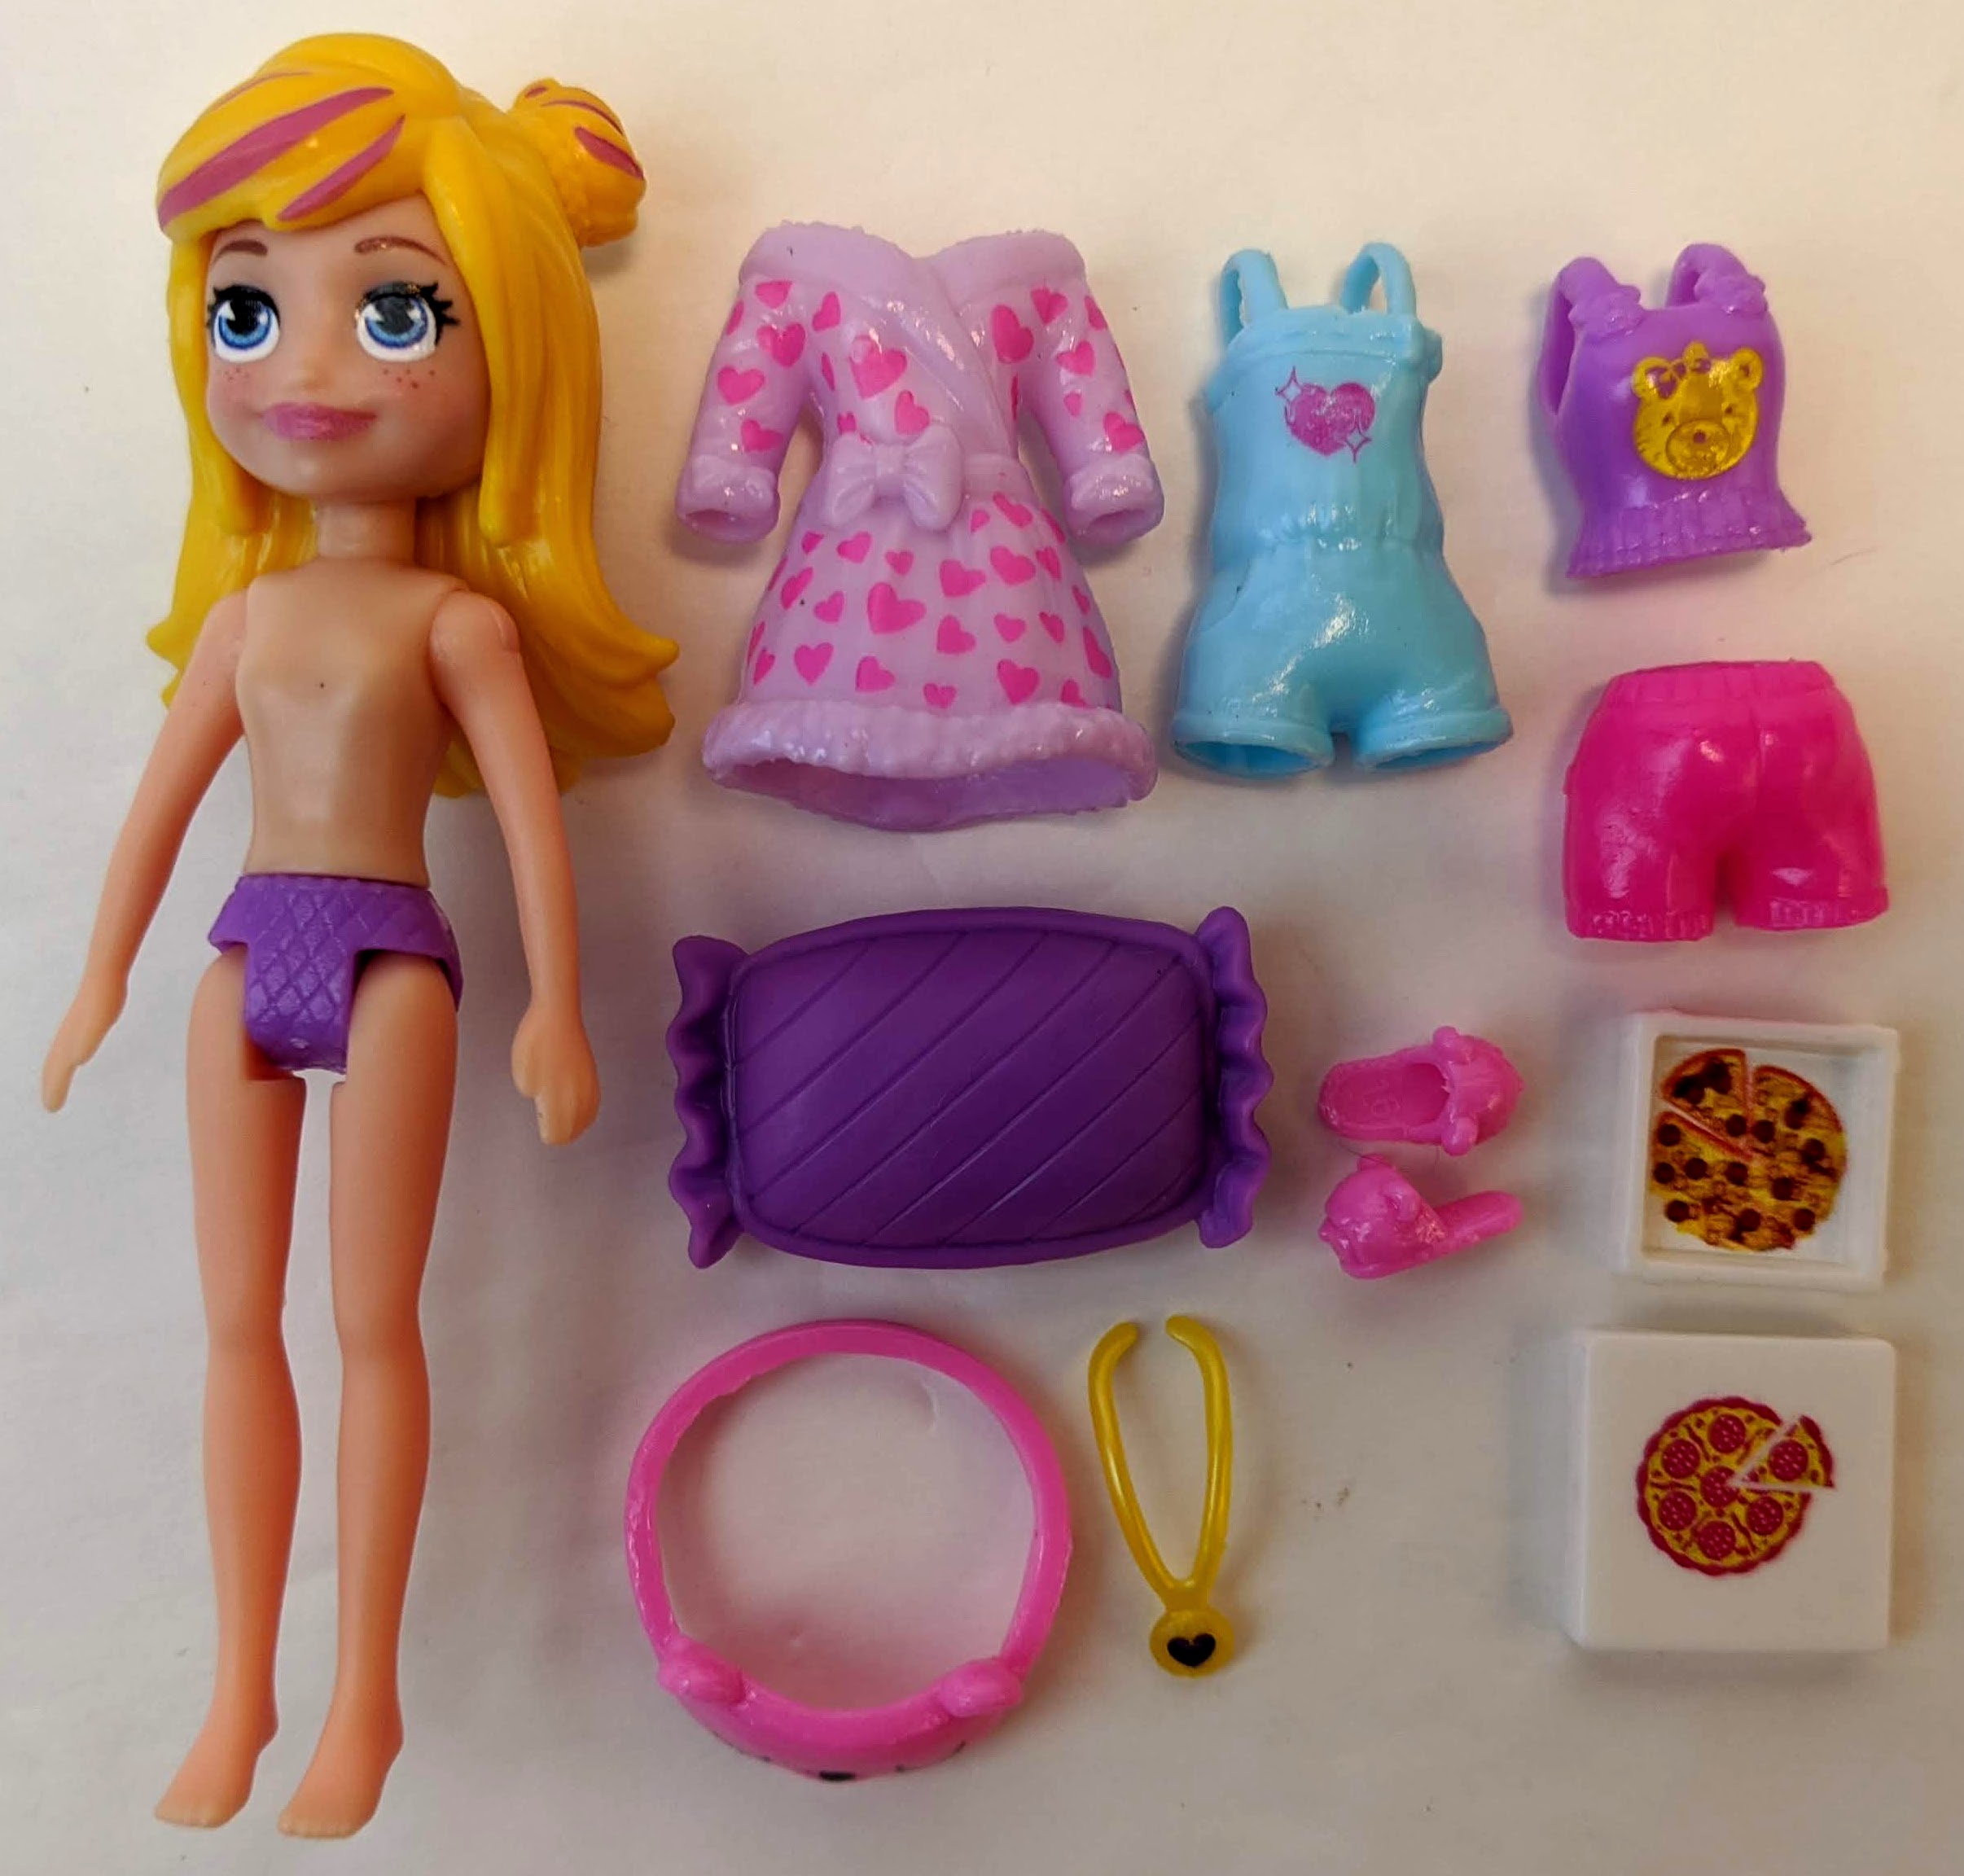 2020 Polly Pocket Index – Fakie Spaceman